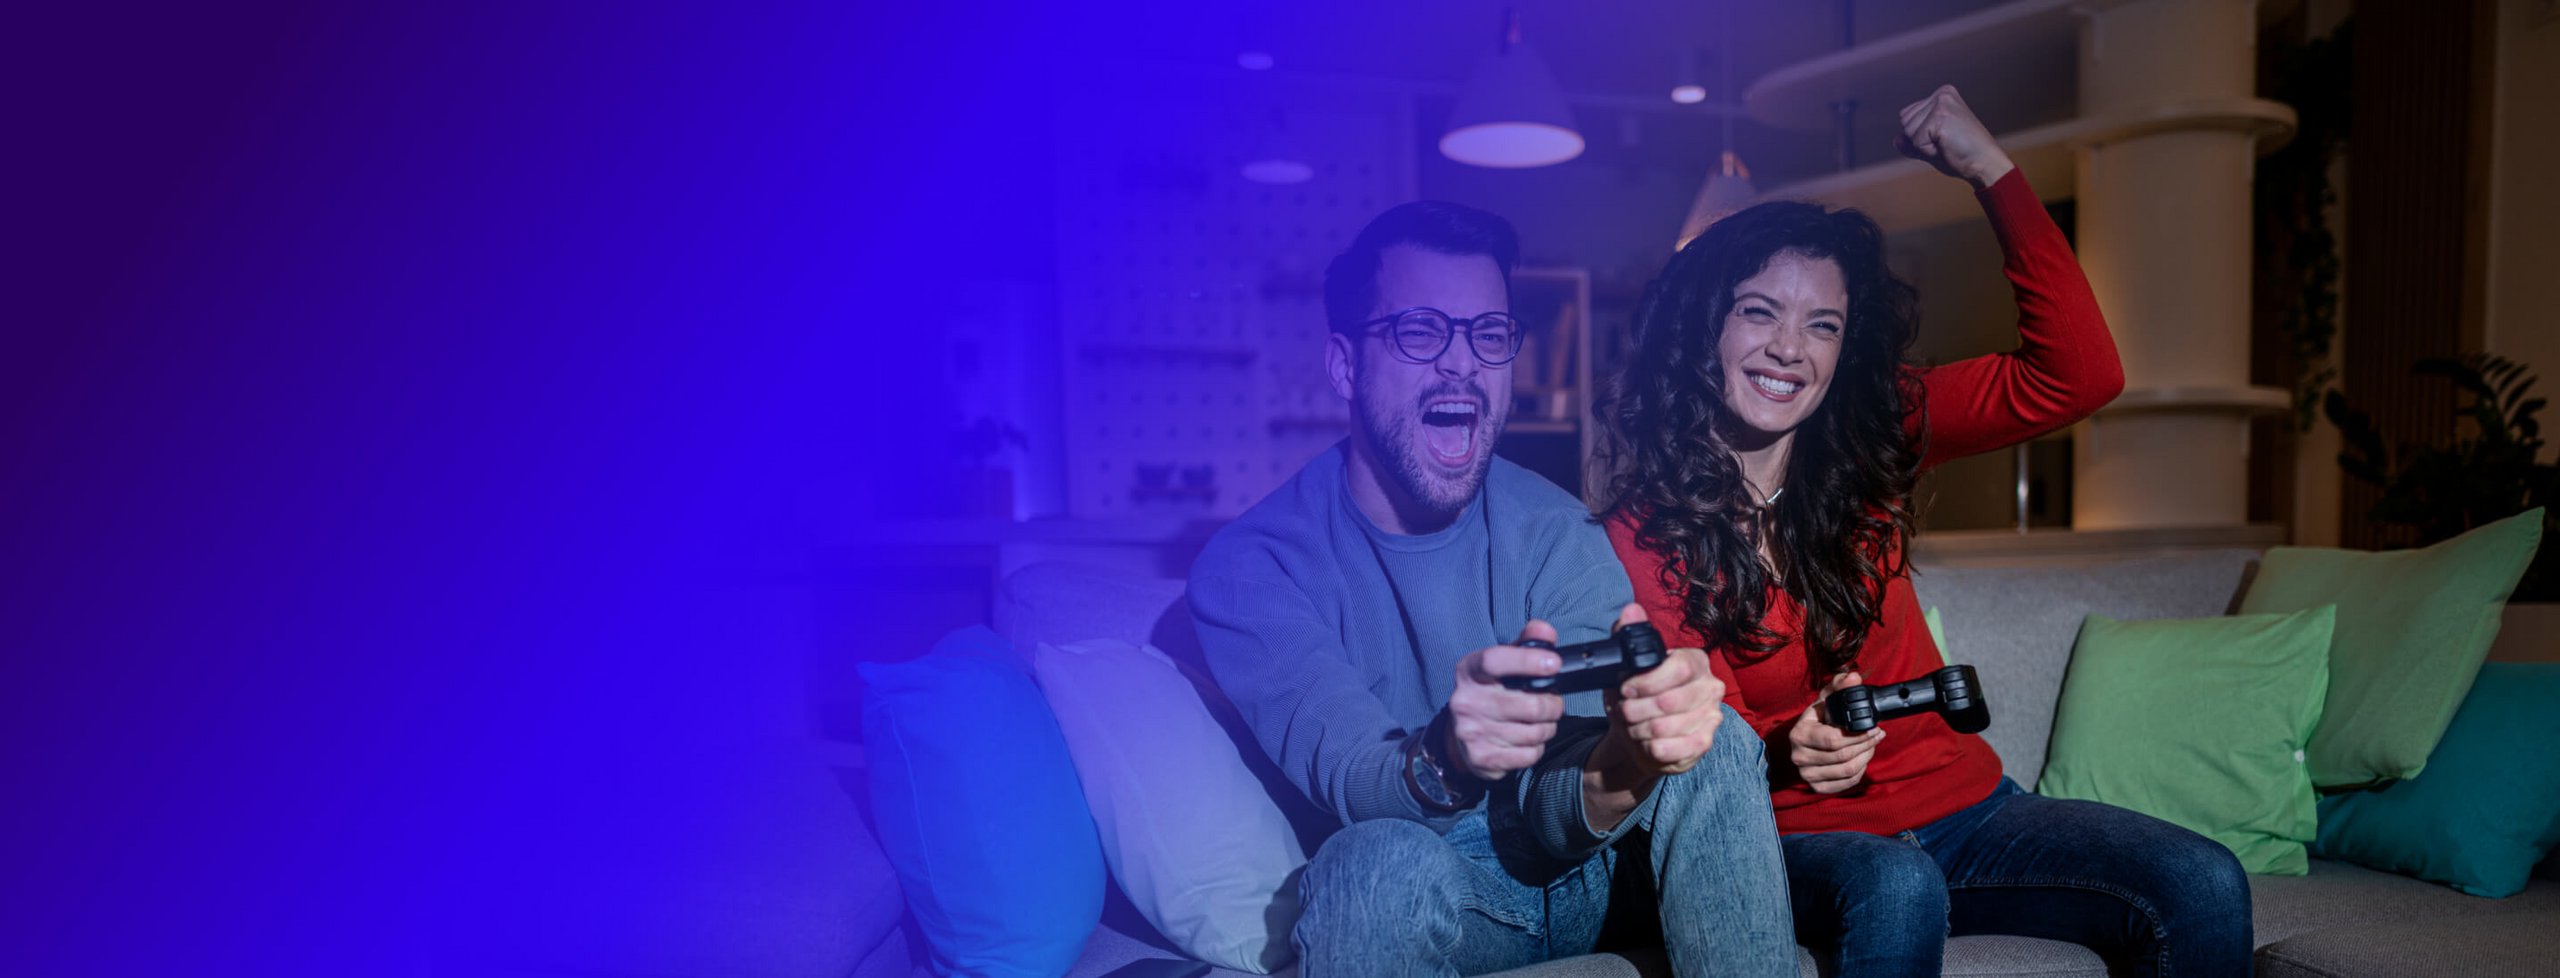 Man and woman playing videogames on the couch